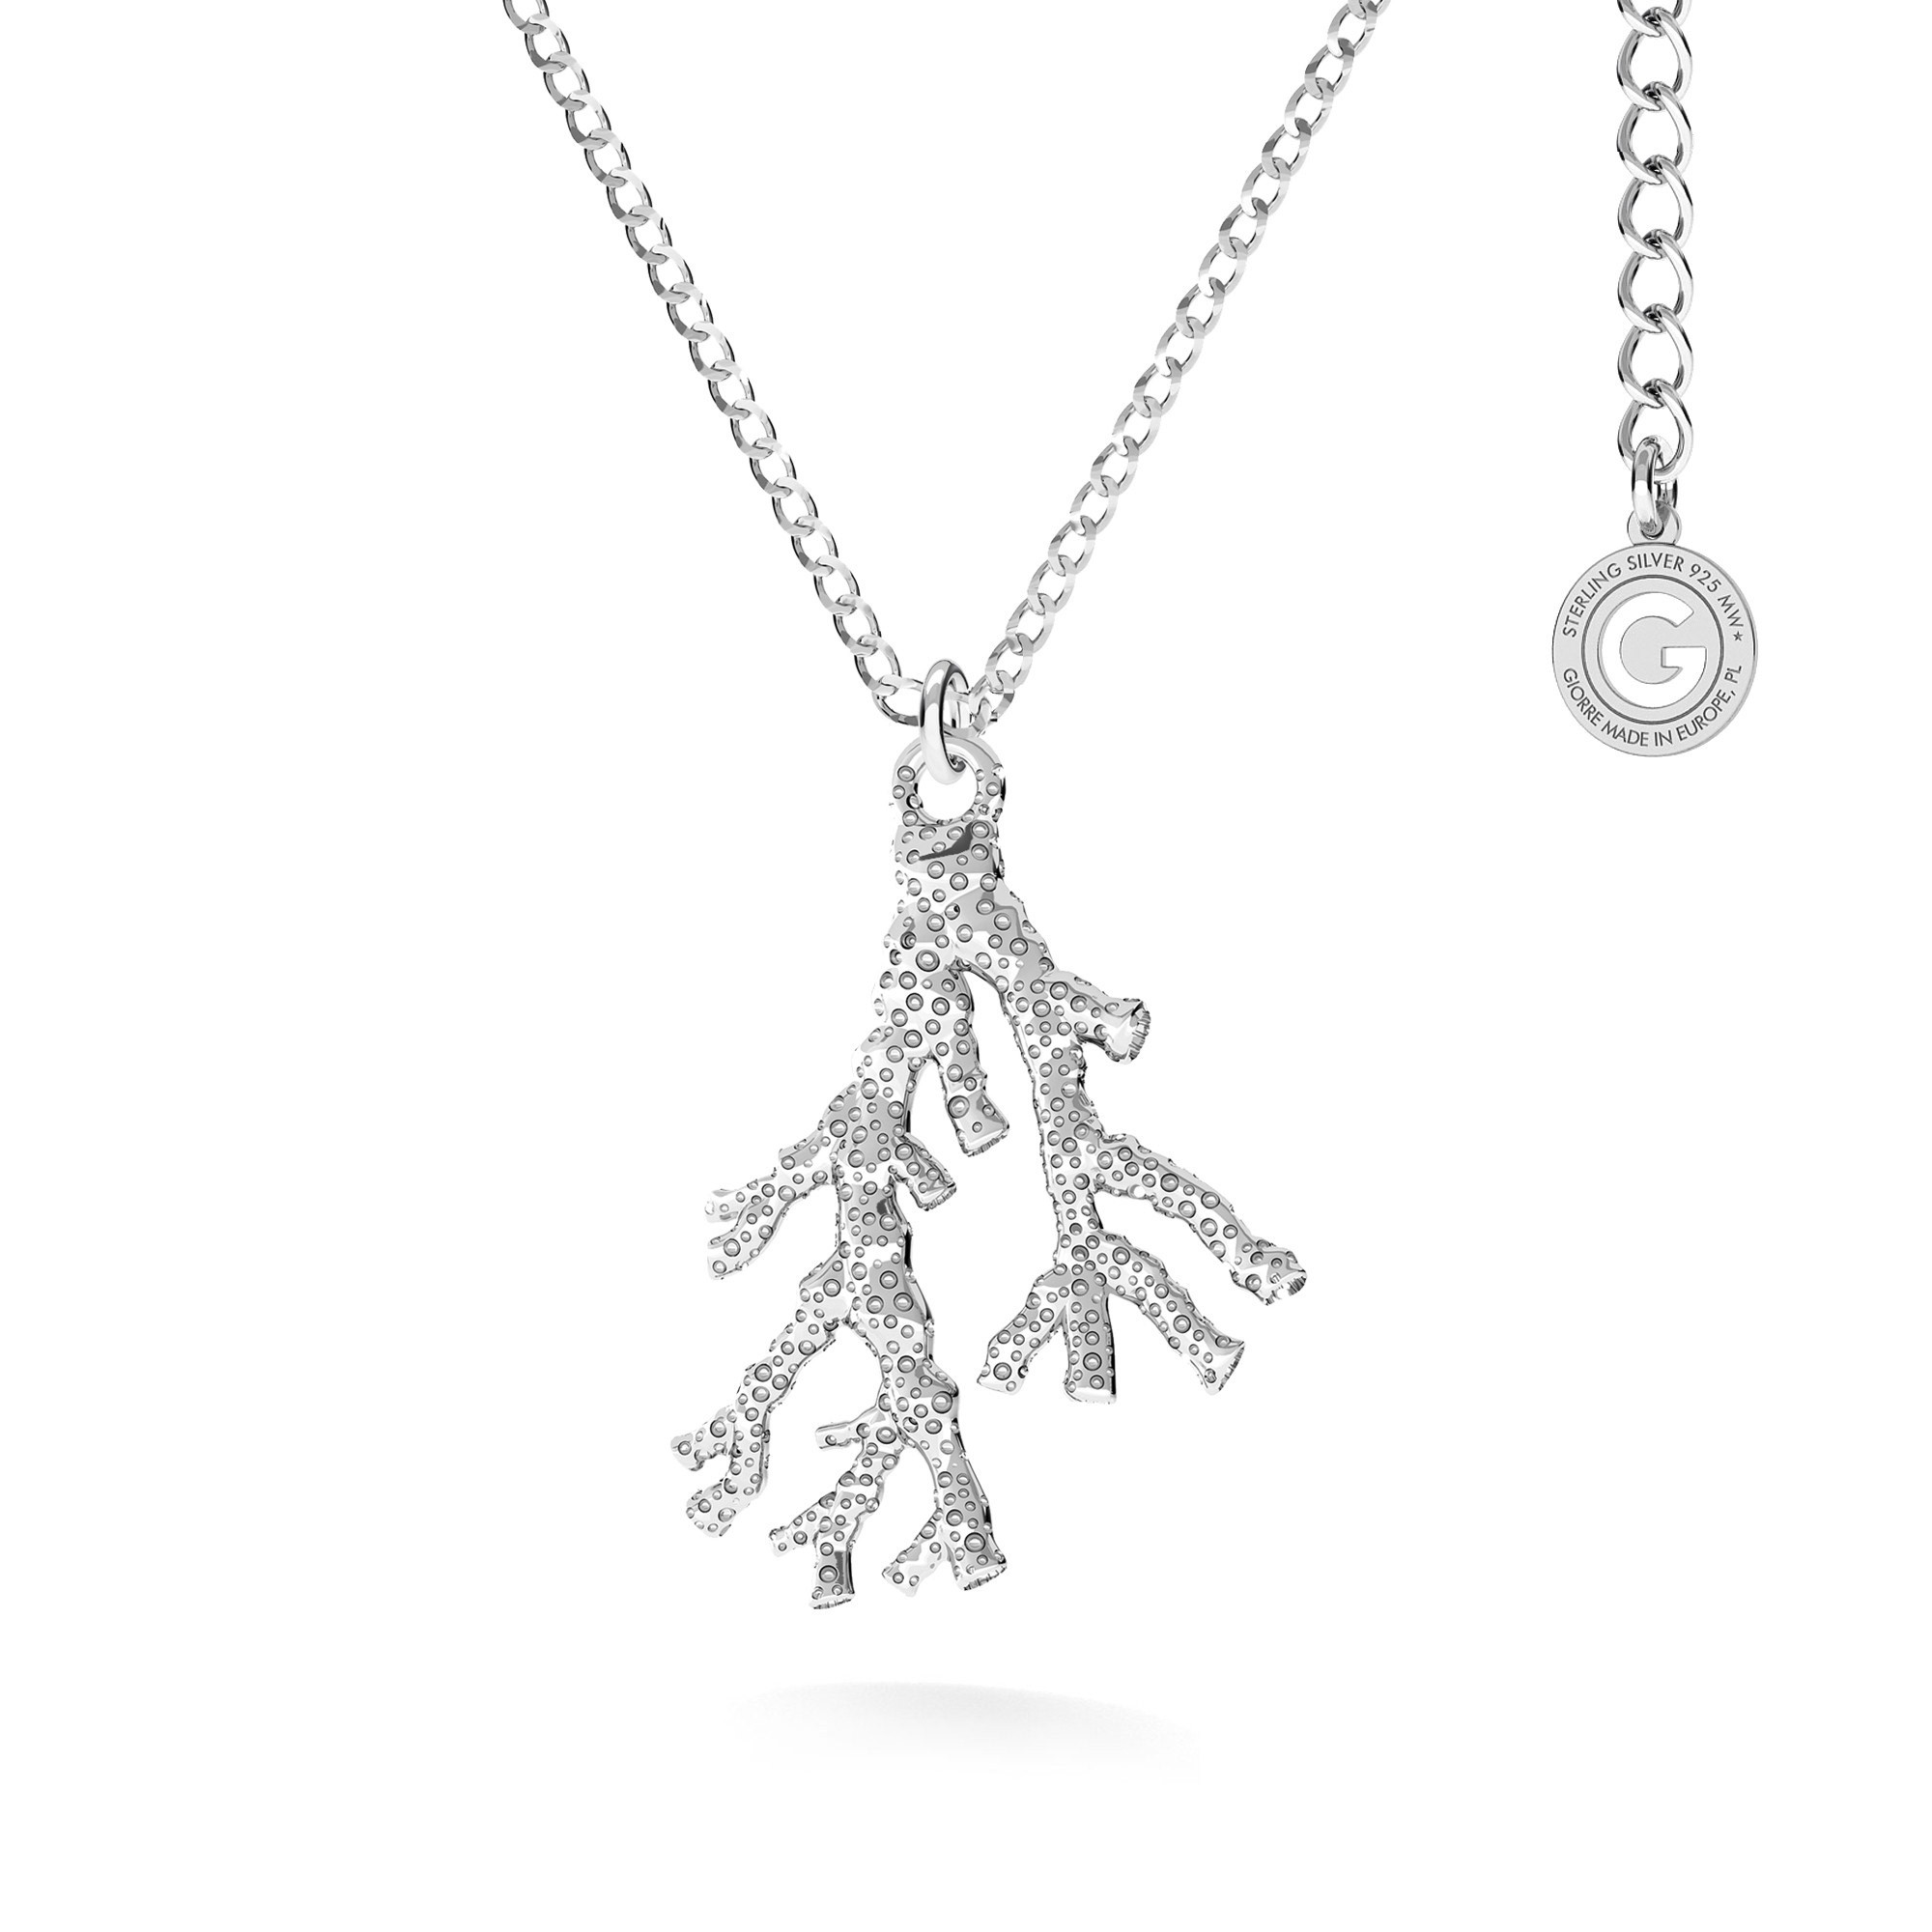 T°ra'vel'' Necklace - your name, sterling silver 925